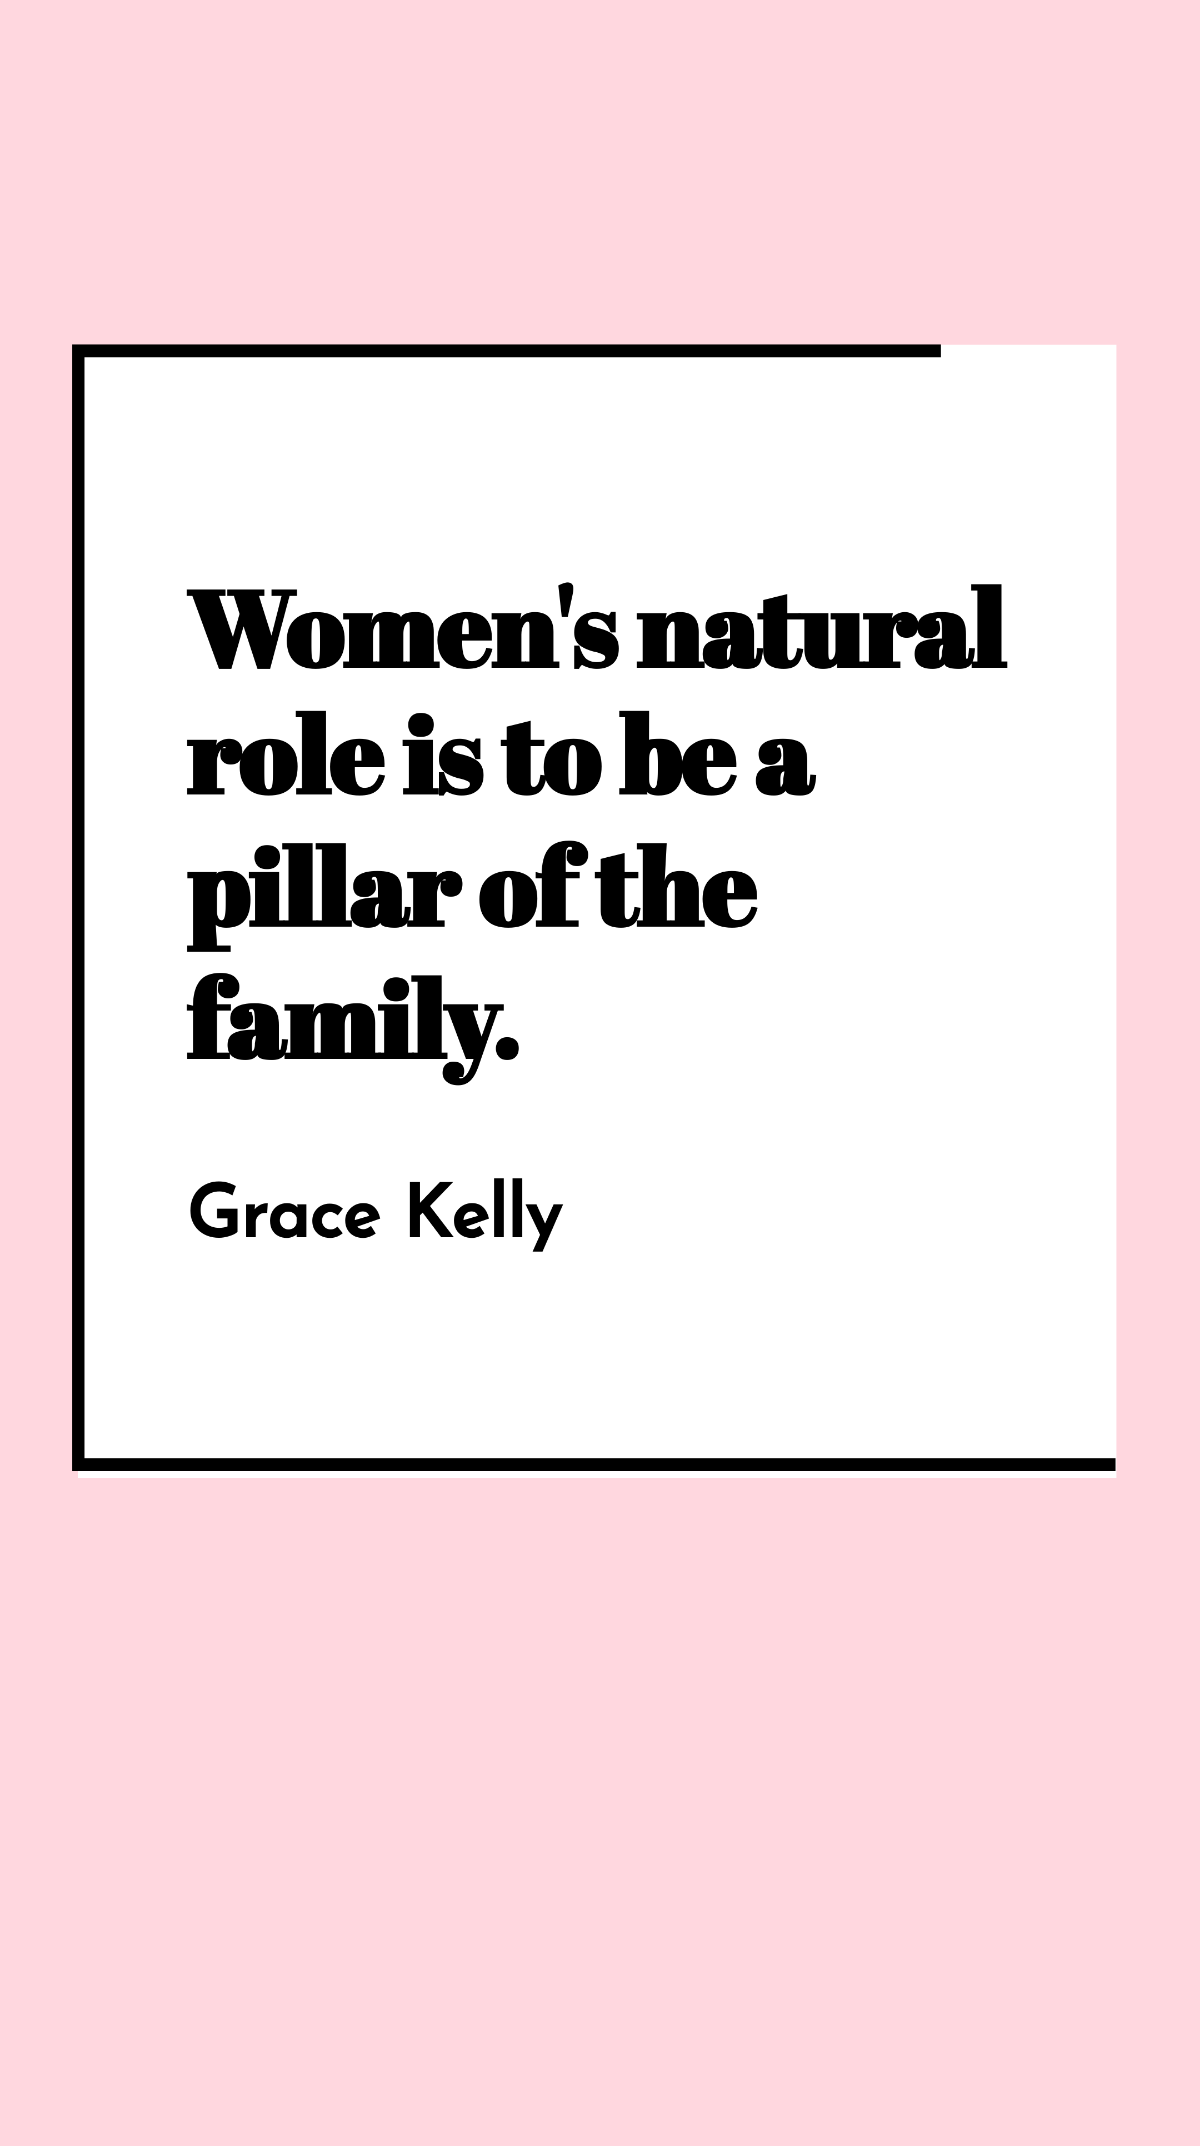 Grace Kelly - Women's natural role is to be a pillar of the family.